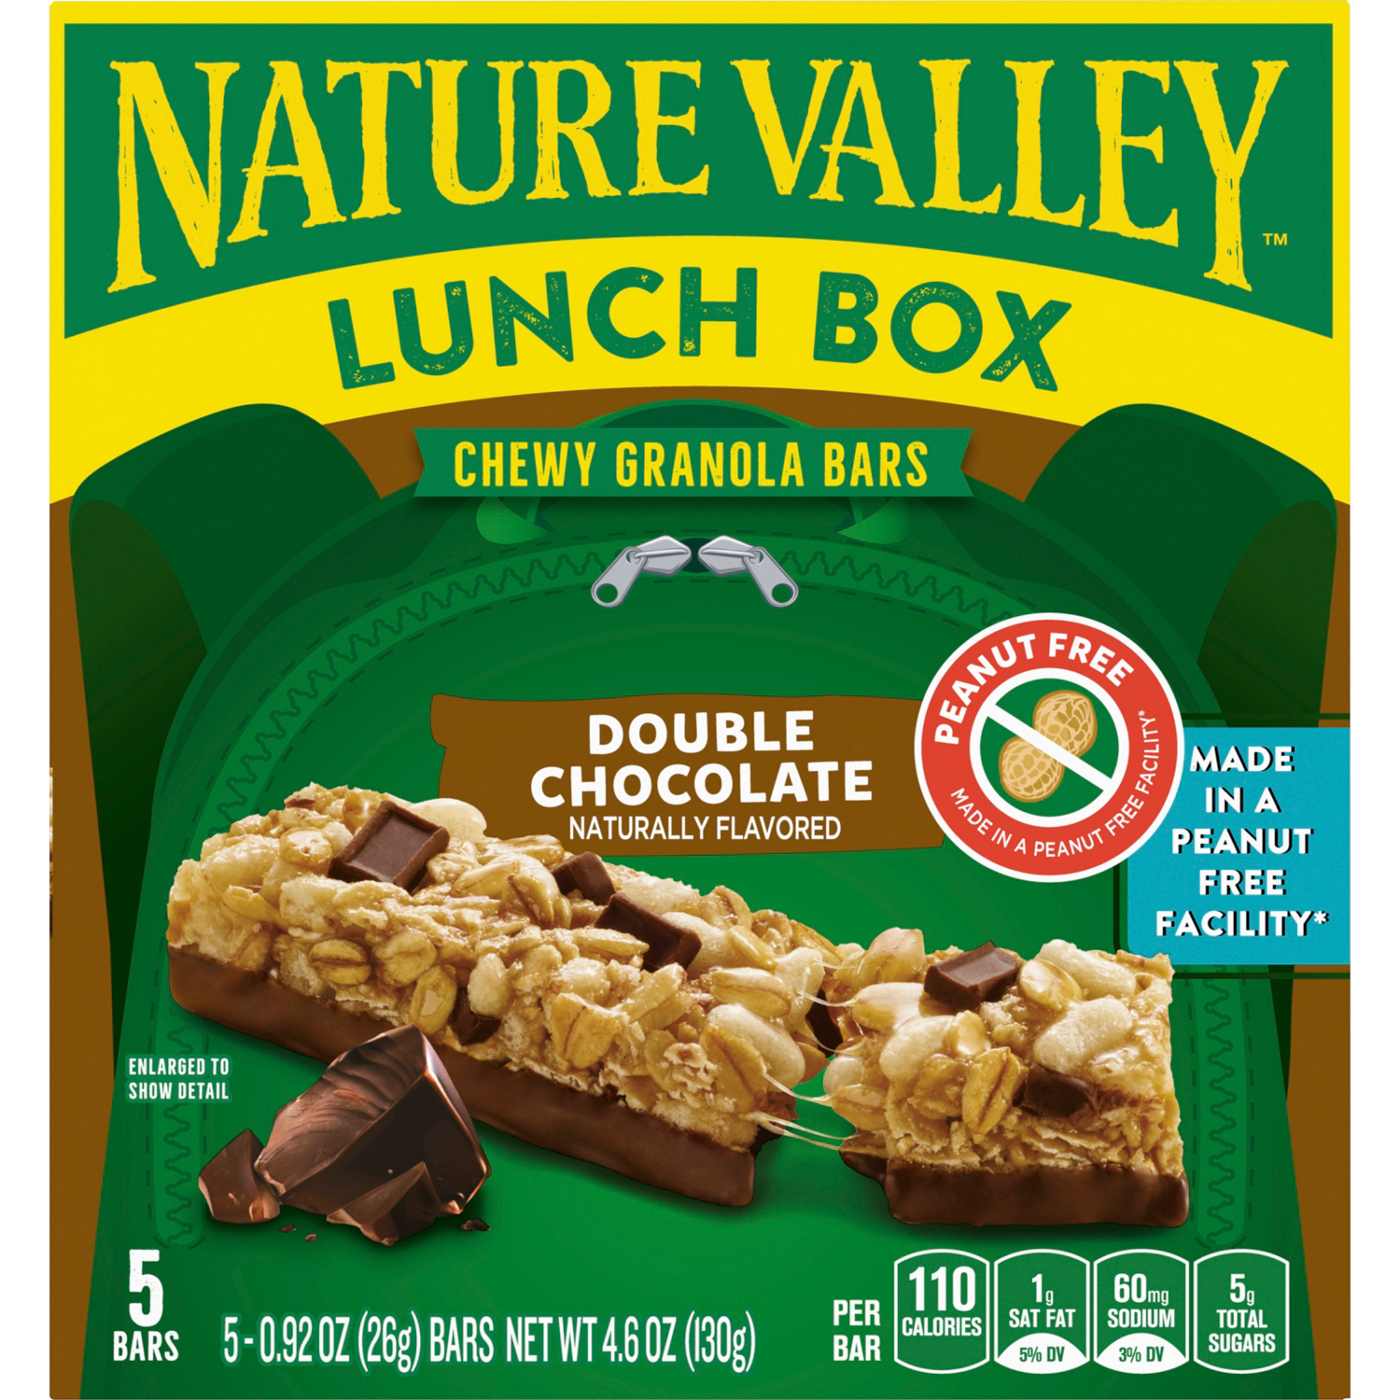 Nature Valley Lunch Box Double Chocolate Chewy Granola Bars; image 1 of 3